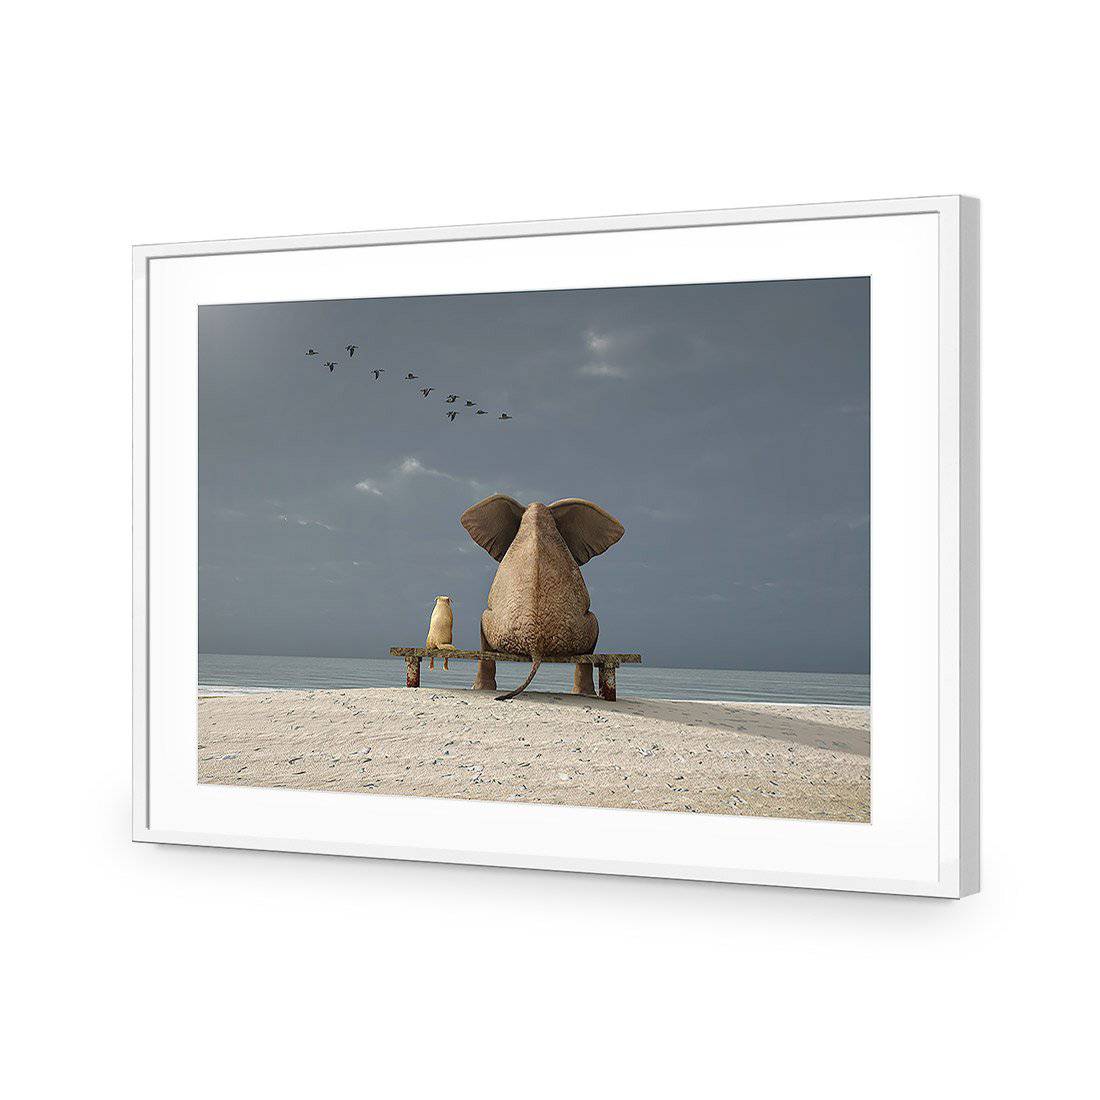 Little And Large-Acrylic-Wall Art Design-With Border-Acrylic - White Frame-45x30cm-Wall Art Designs